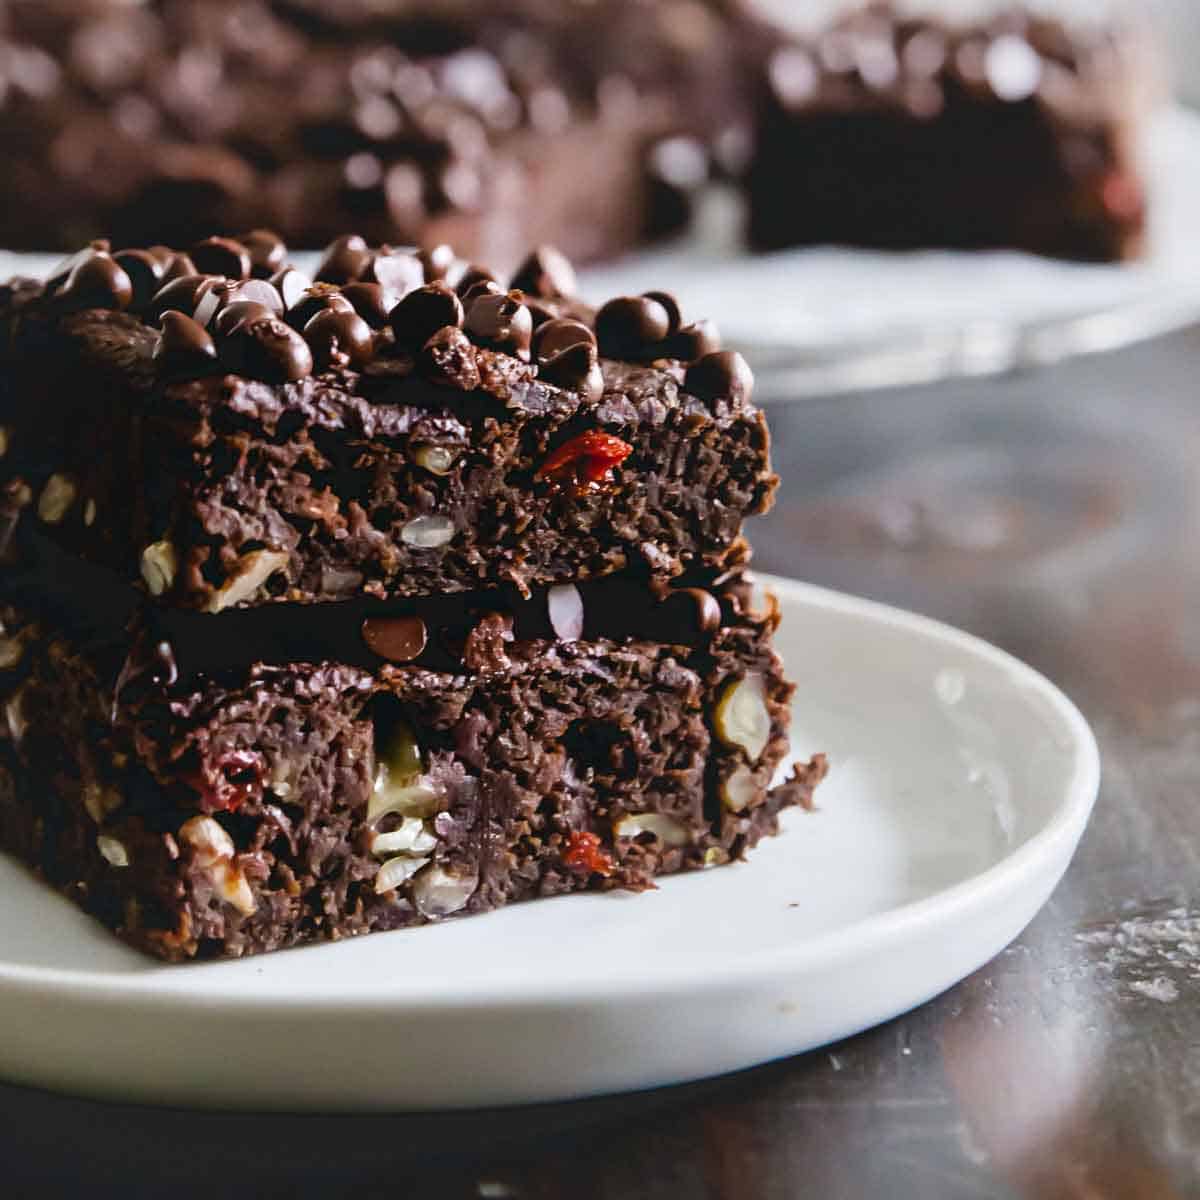 Easy vegan black bean brownie recipe made in just 20 minutes. Decadently fudgy and gluten-free as well!